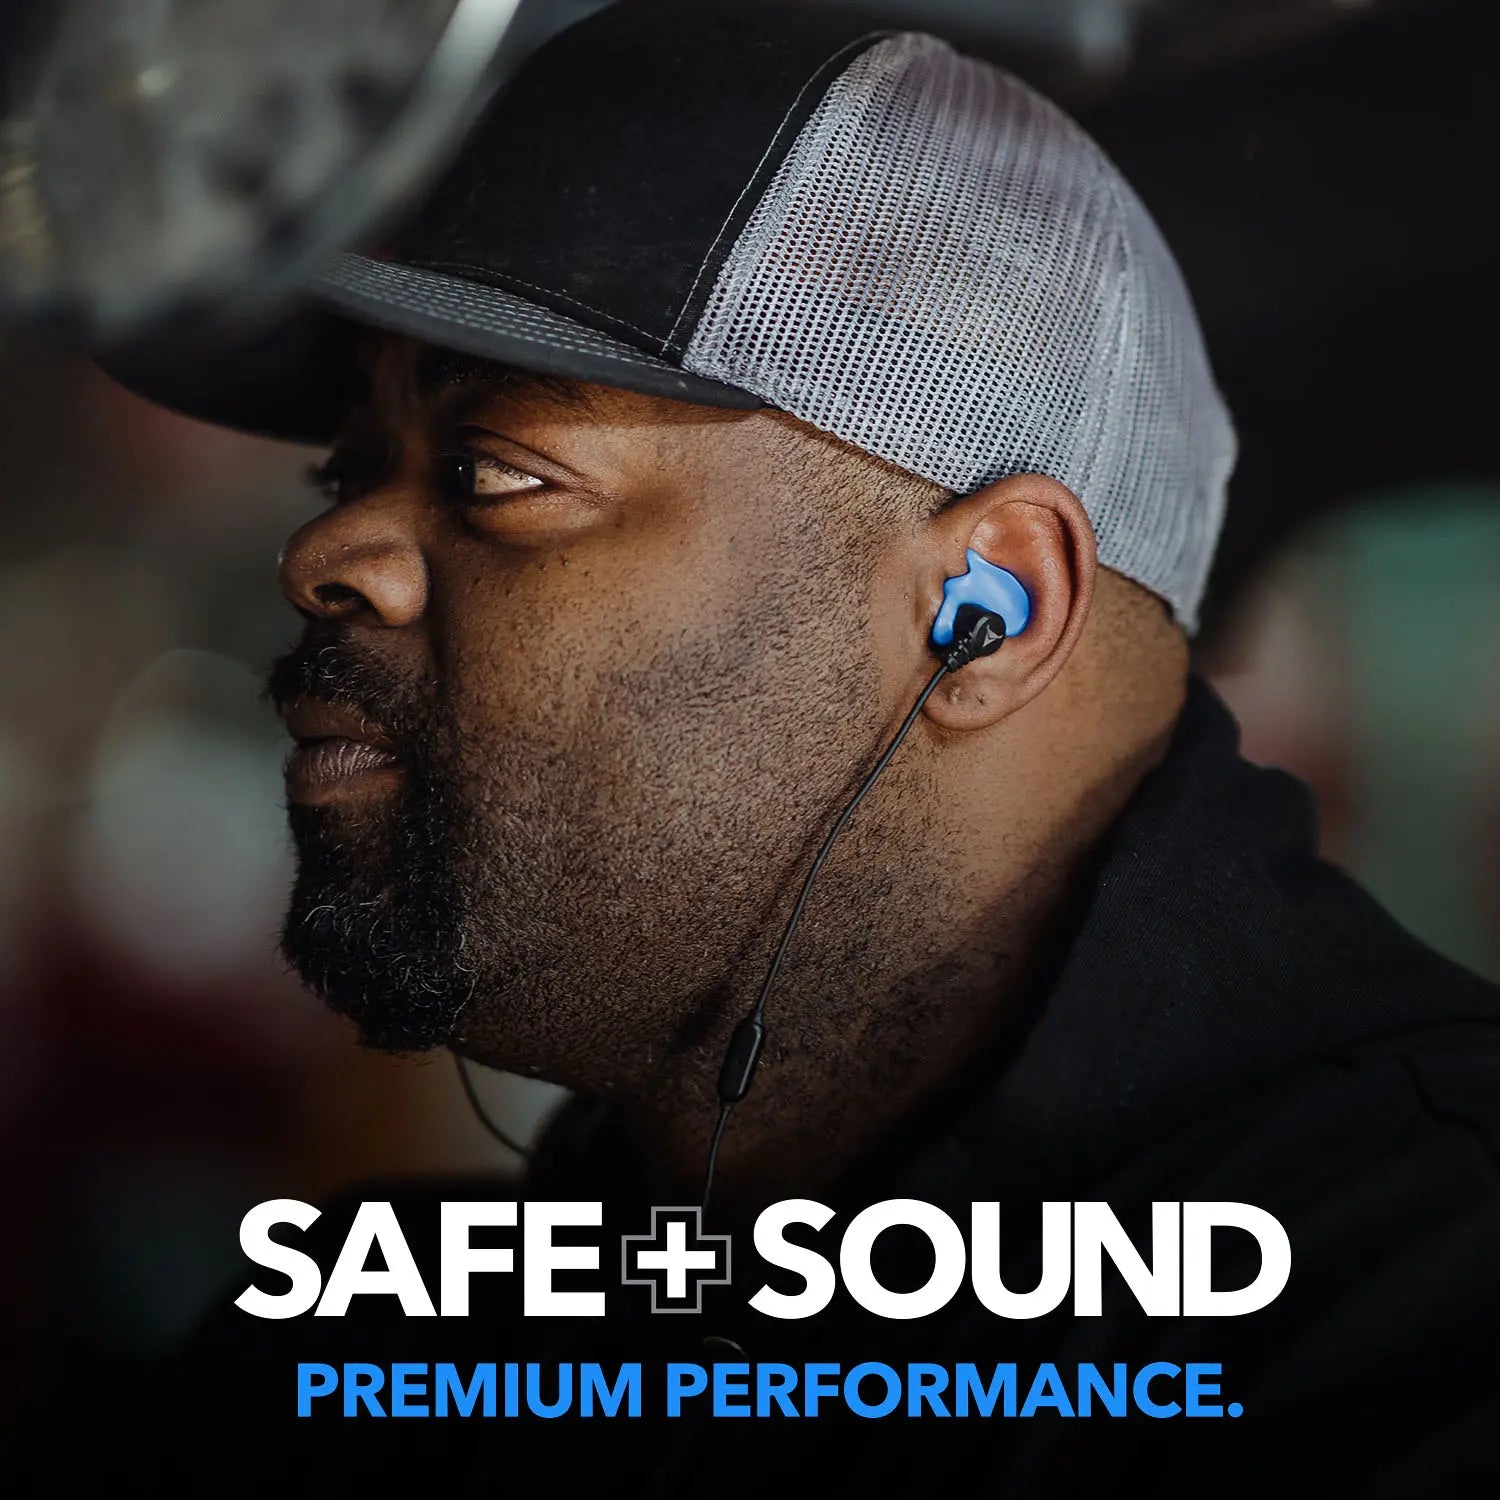 A man wearing a black shirt and a black and gray baseball cap is shown in close-up, donning blue earplugs with a thin black cord. The text "Decibullz SAFE + SOUND Custom Molded Bluetooth Wireless Earplug Headphones" is displayed at the bottom of the image, highlighting advanced noise suppression technology.